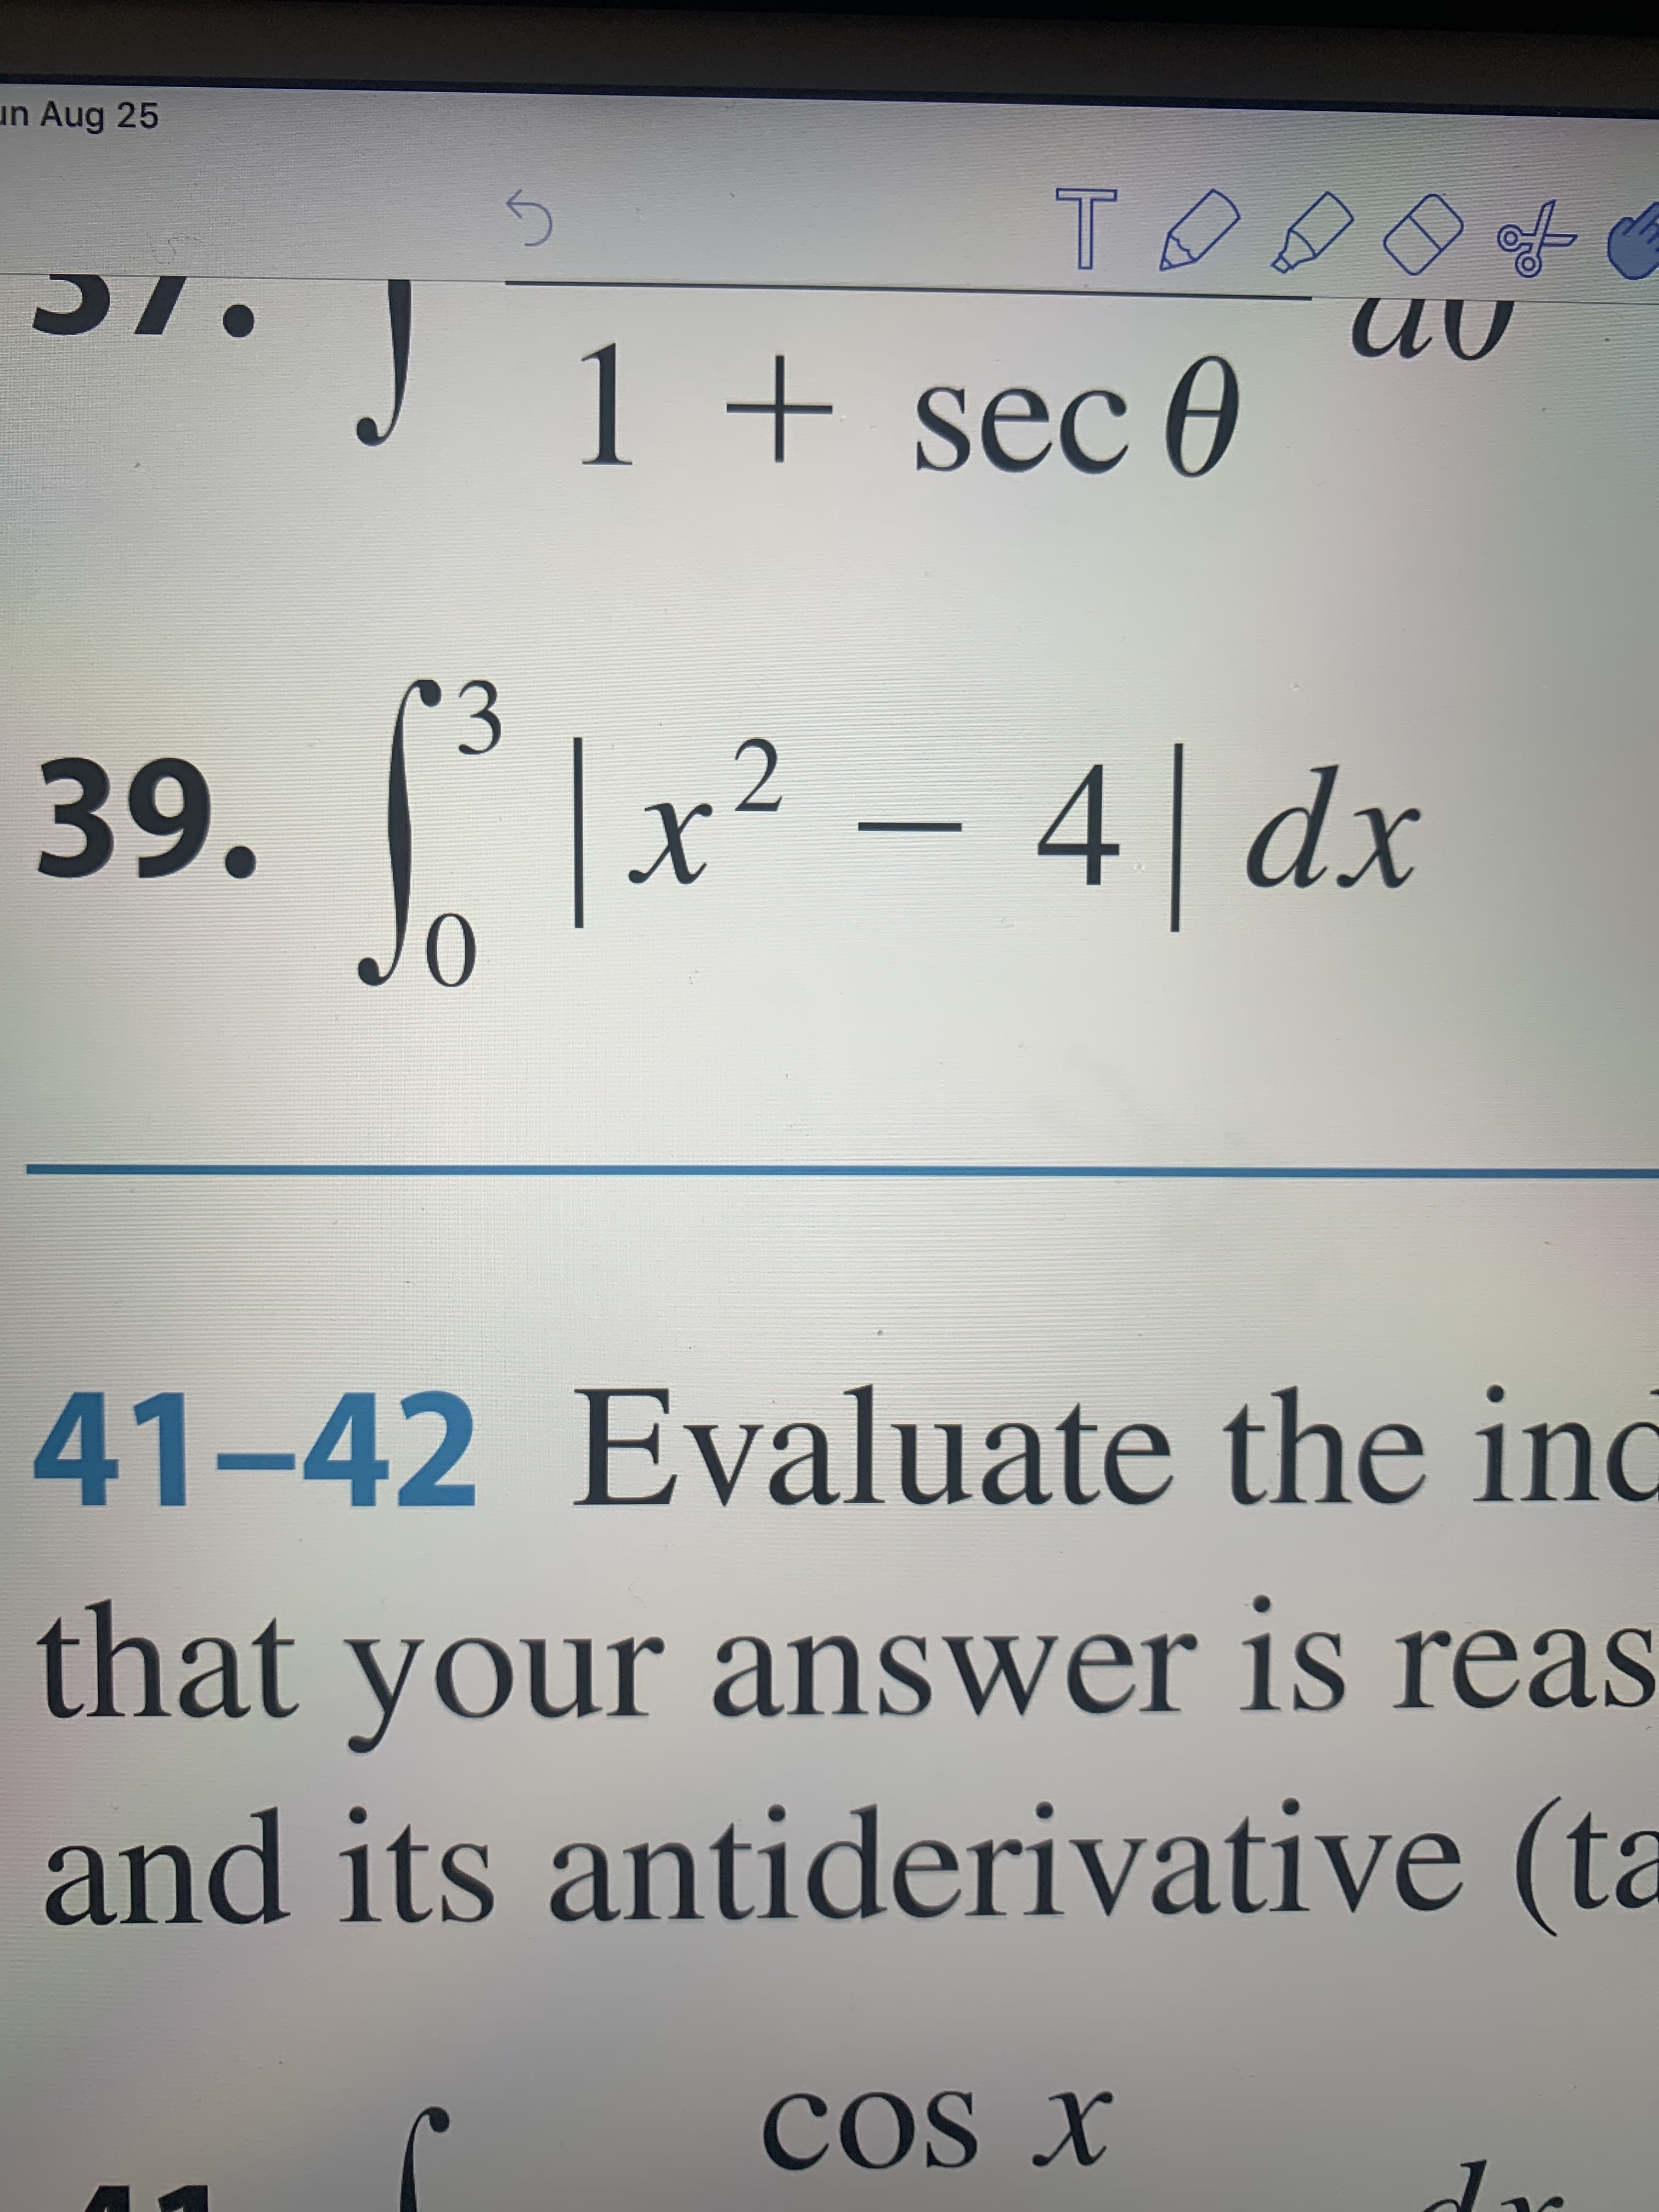 un Aug 25
TOOOT
1sec
3
39.
x2-4dx
0
41-42 Evaluate the ind
that your answer is reas
and its antiderivative (ta
COS X
